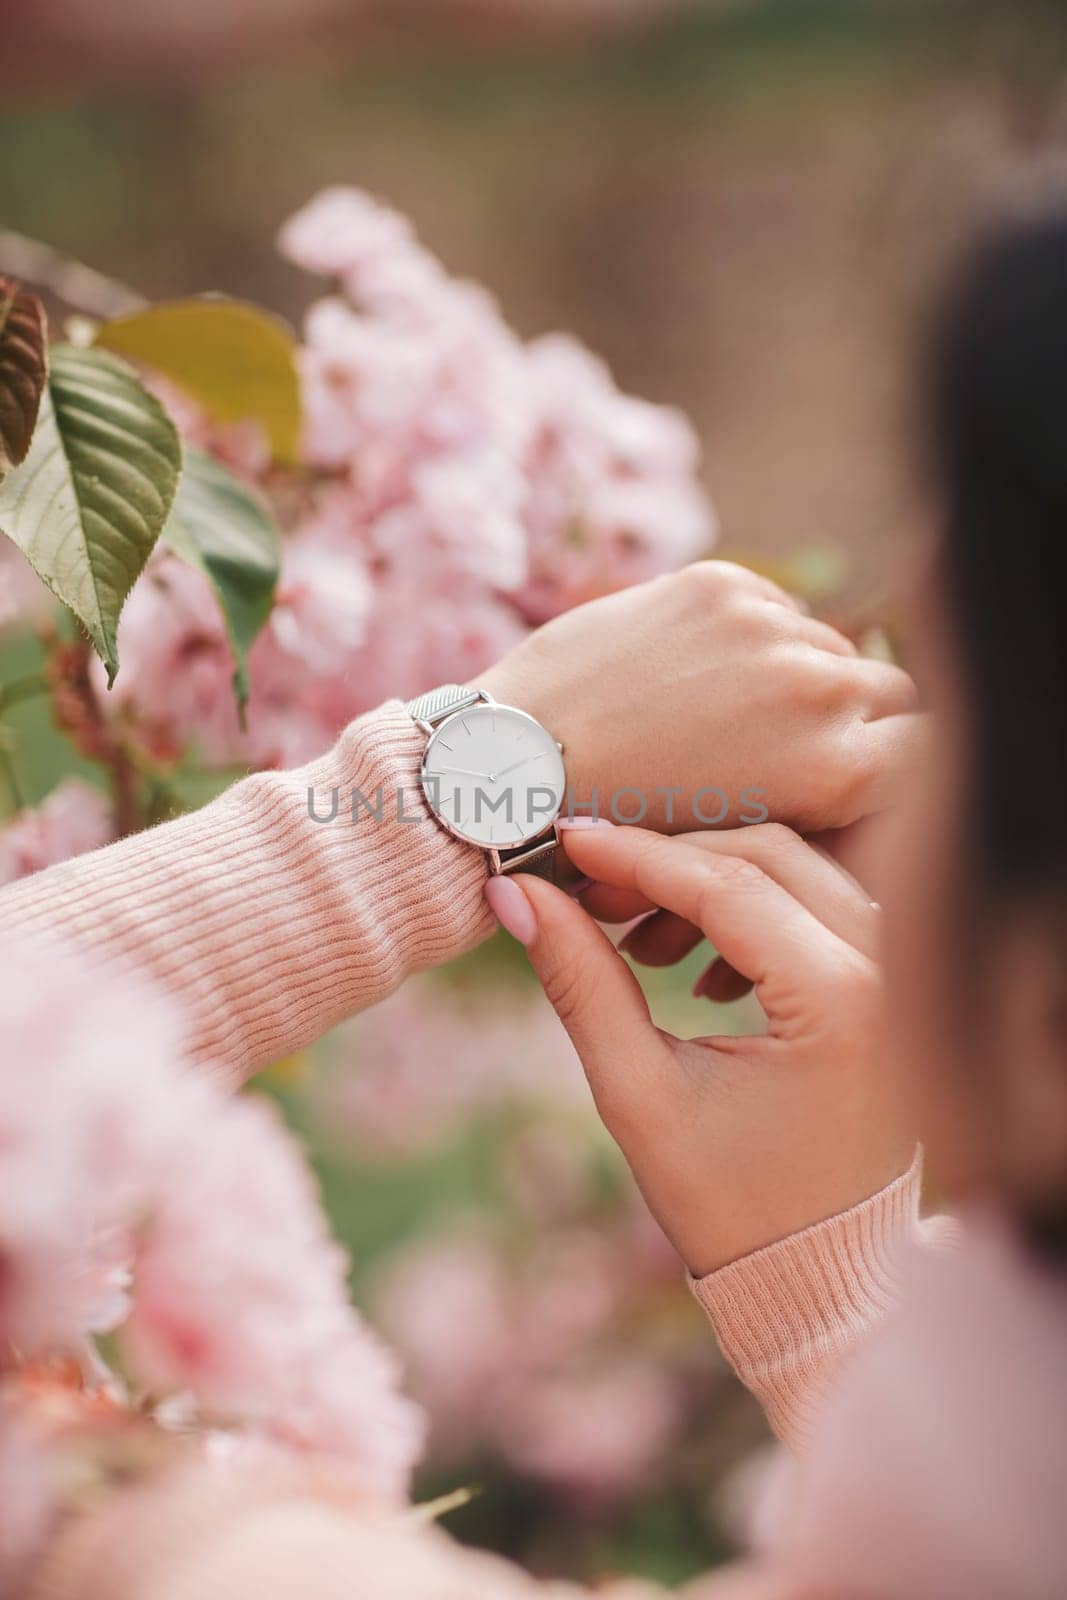 Stylish watch on woman hand on flower background. woman looking at her watch.